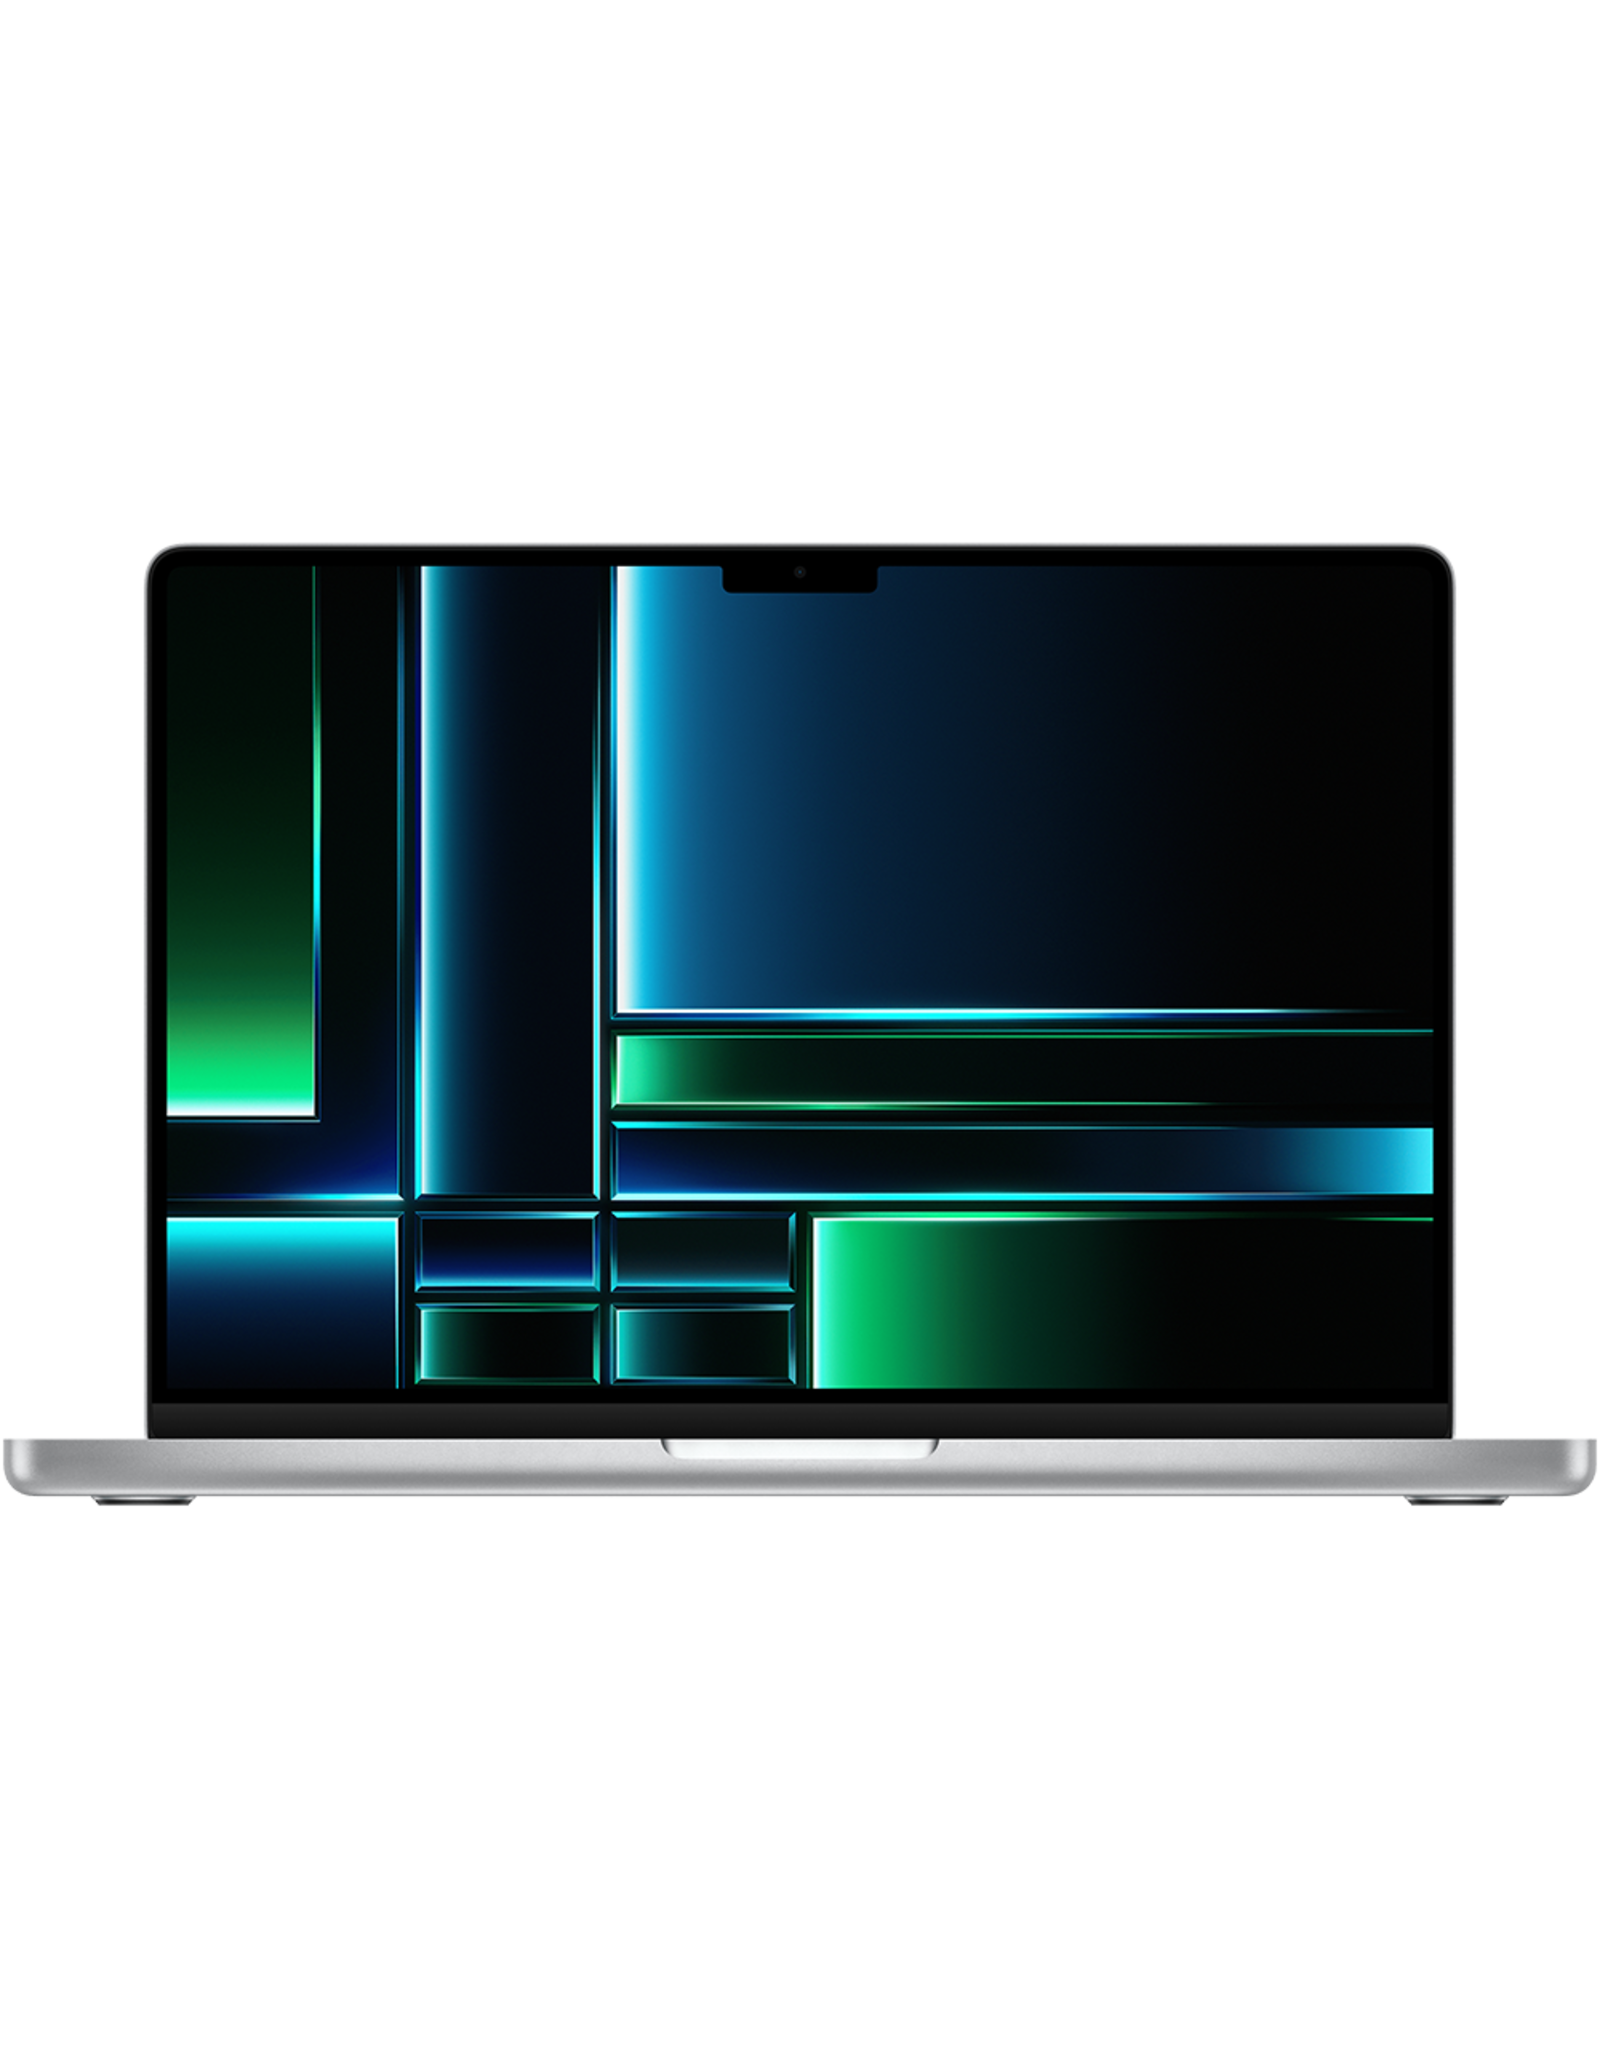 Apple 14-inch MacBook Pro: Apple M2 Pro chip with 10‑core CPU and 16‑core GPU, 512GB SSD - Silver